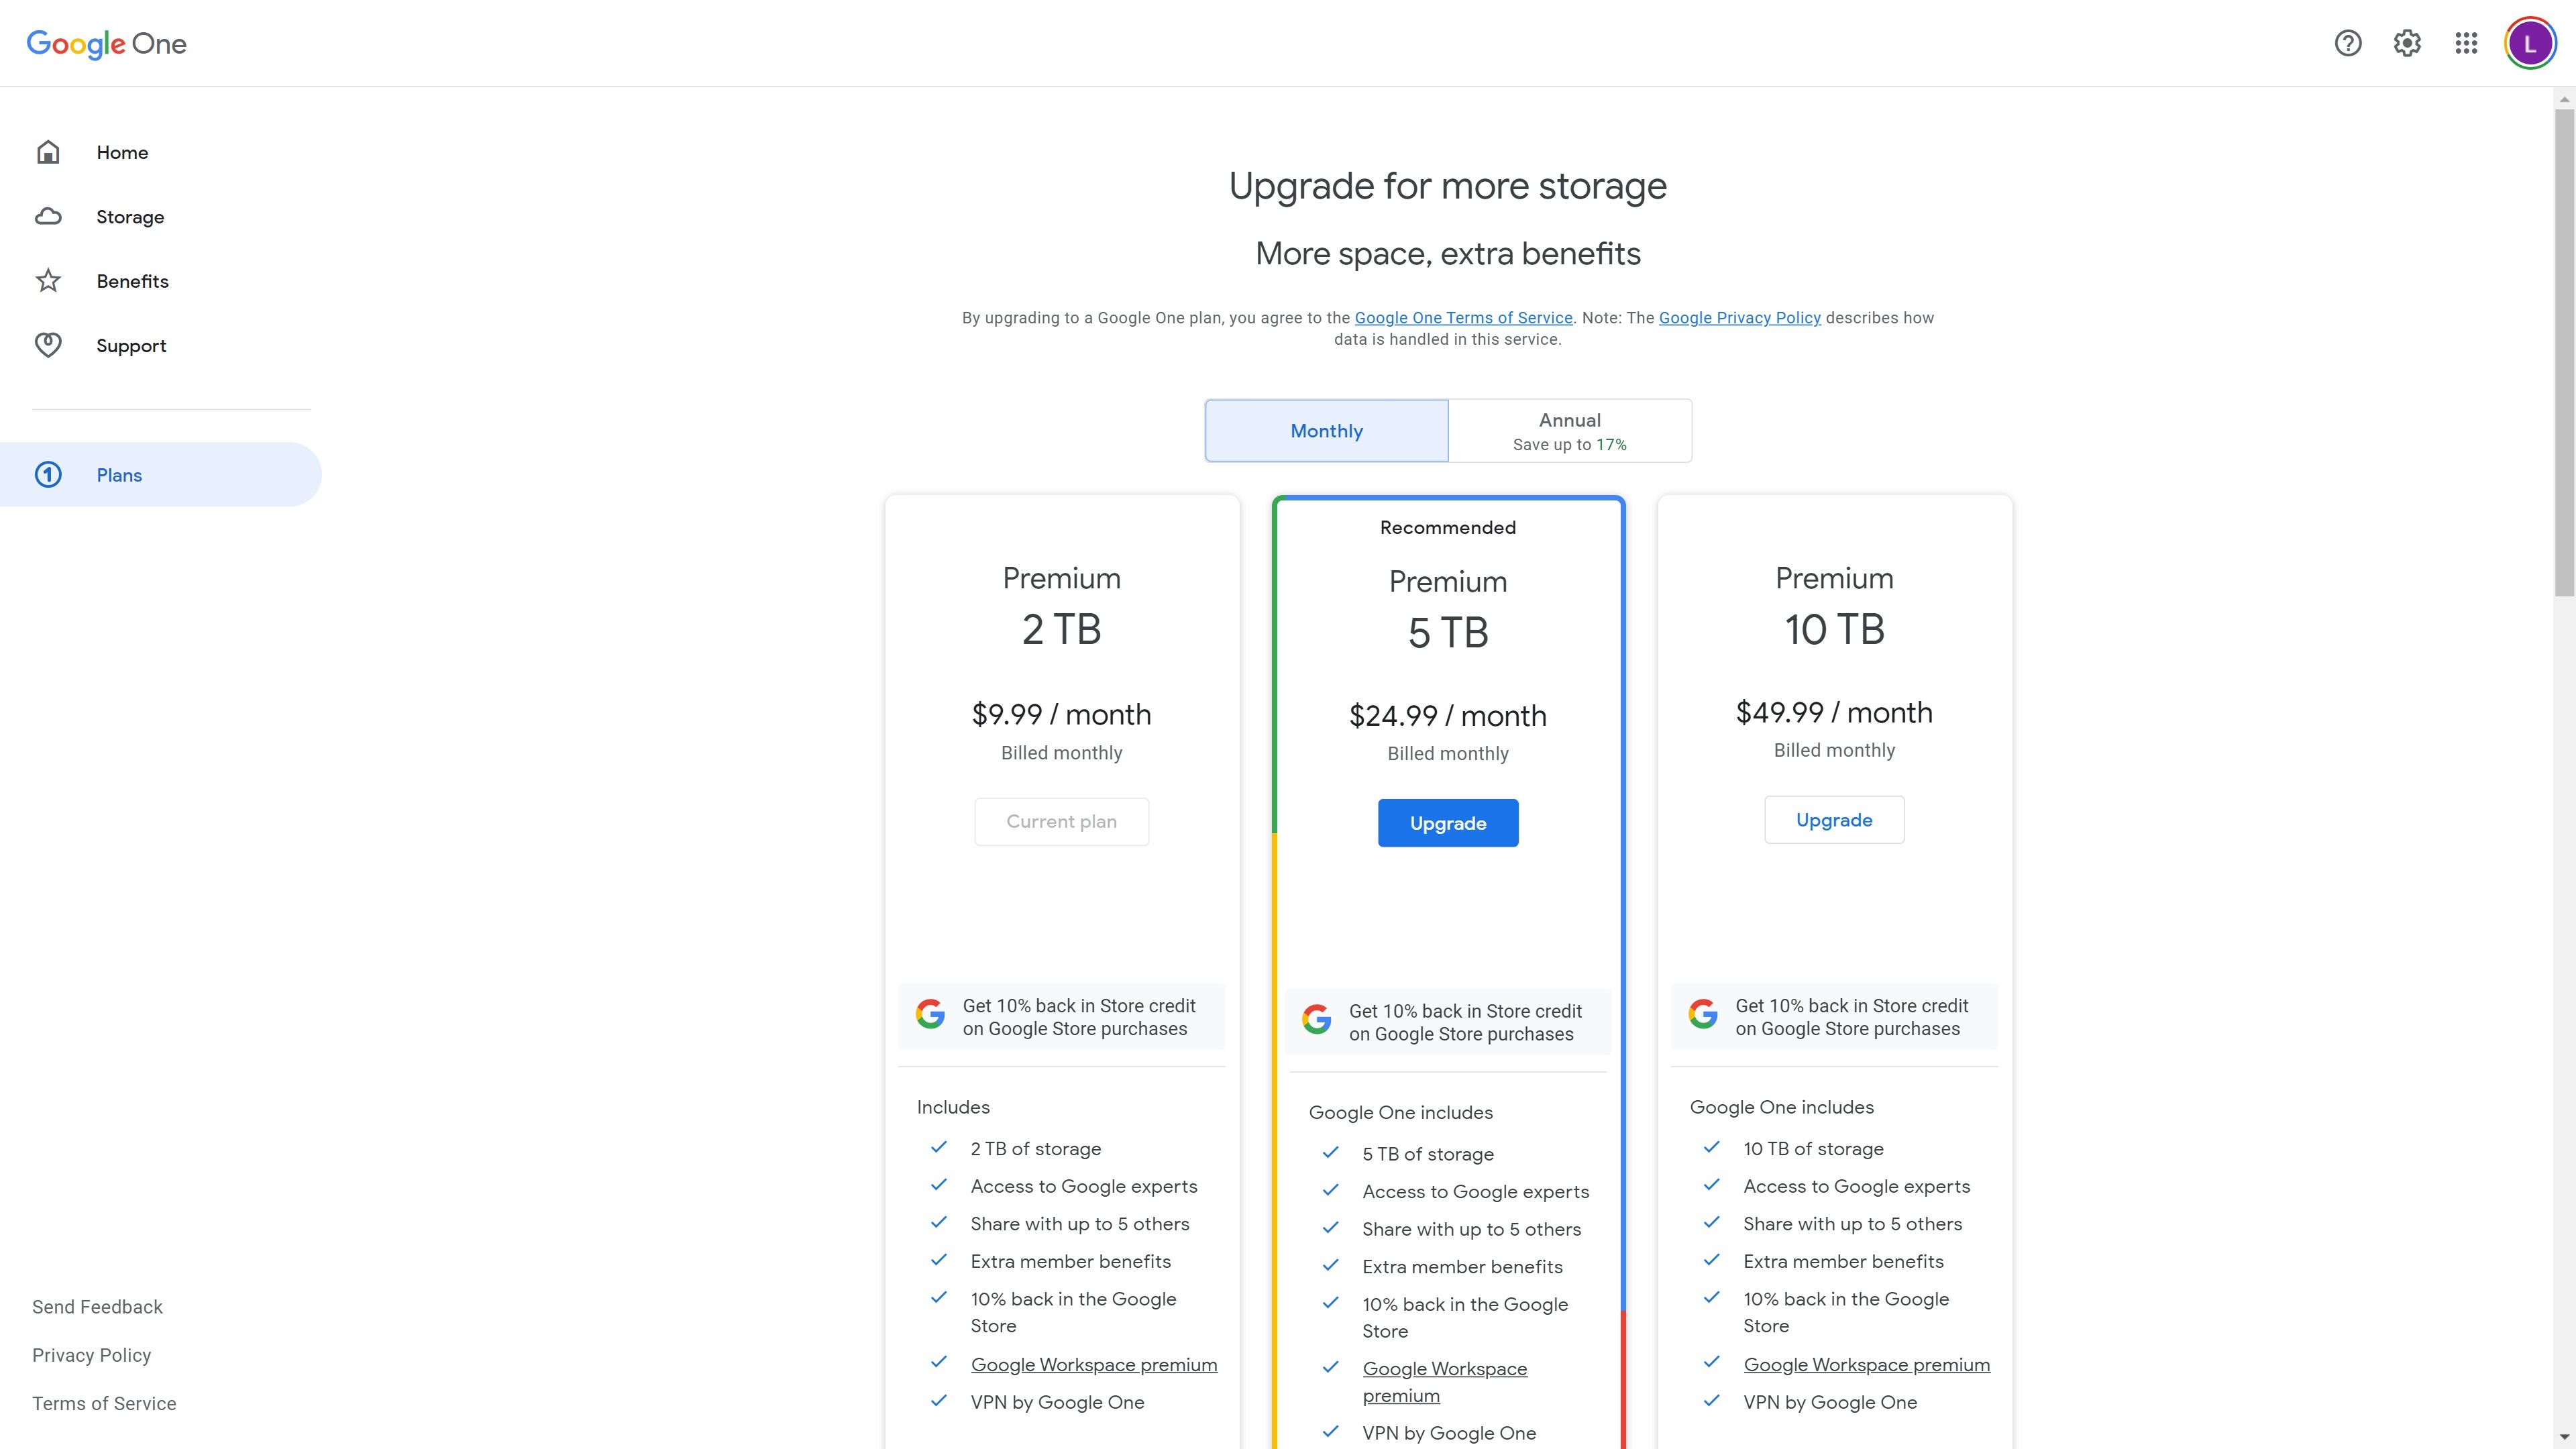 Screenshot of the upgrades page on the Google One website.